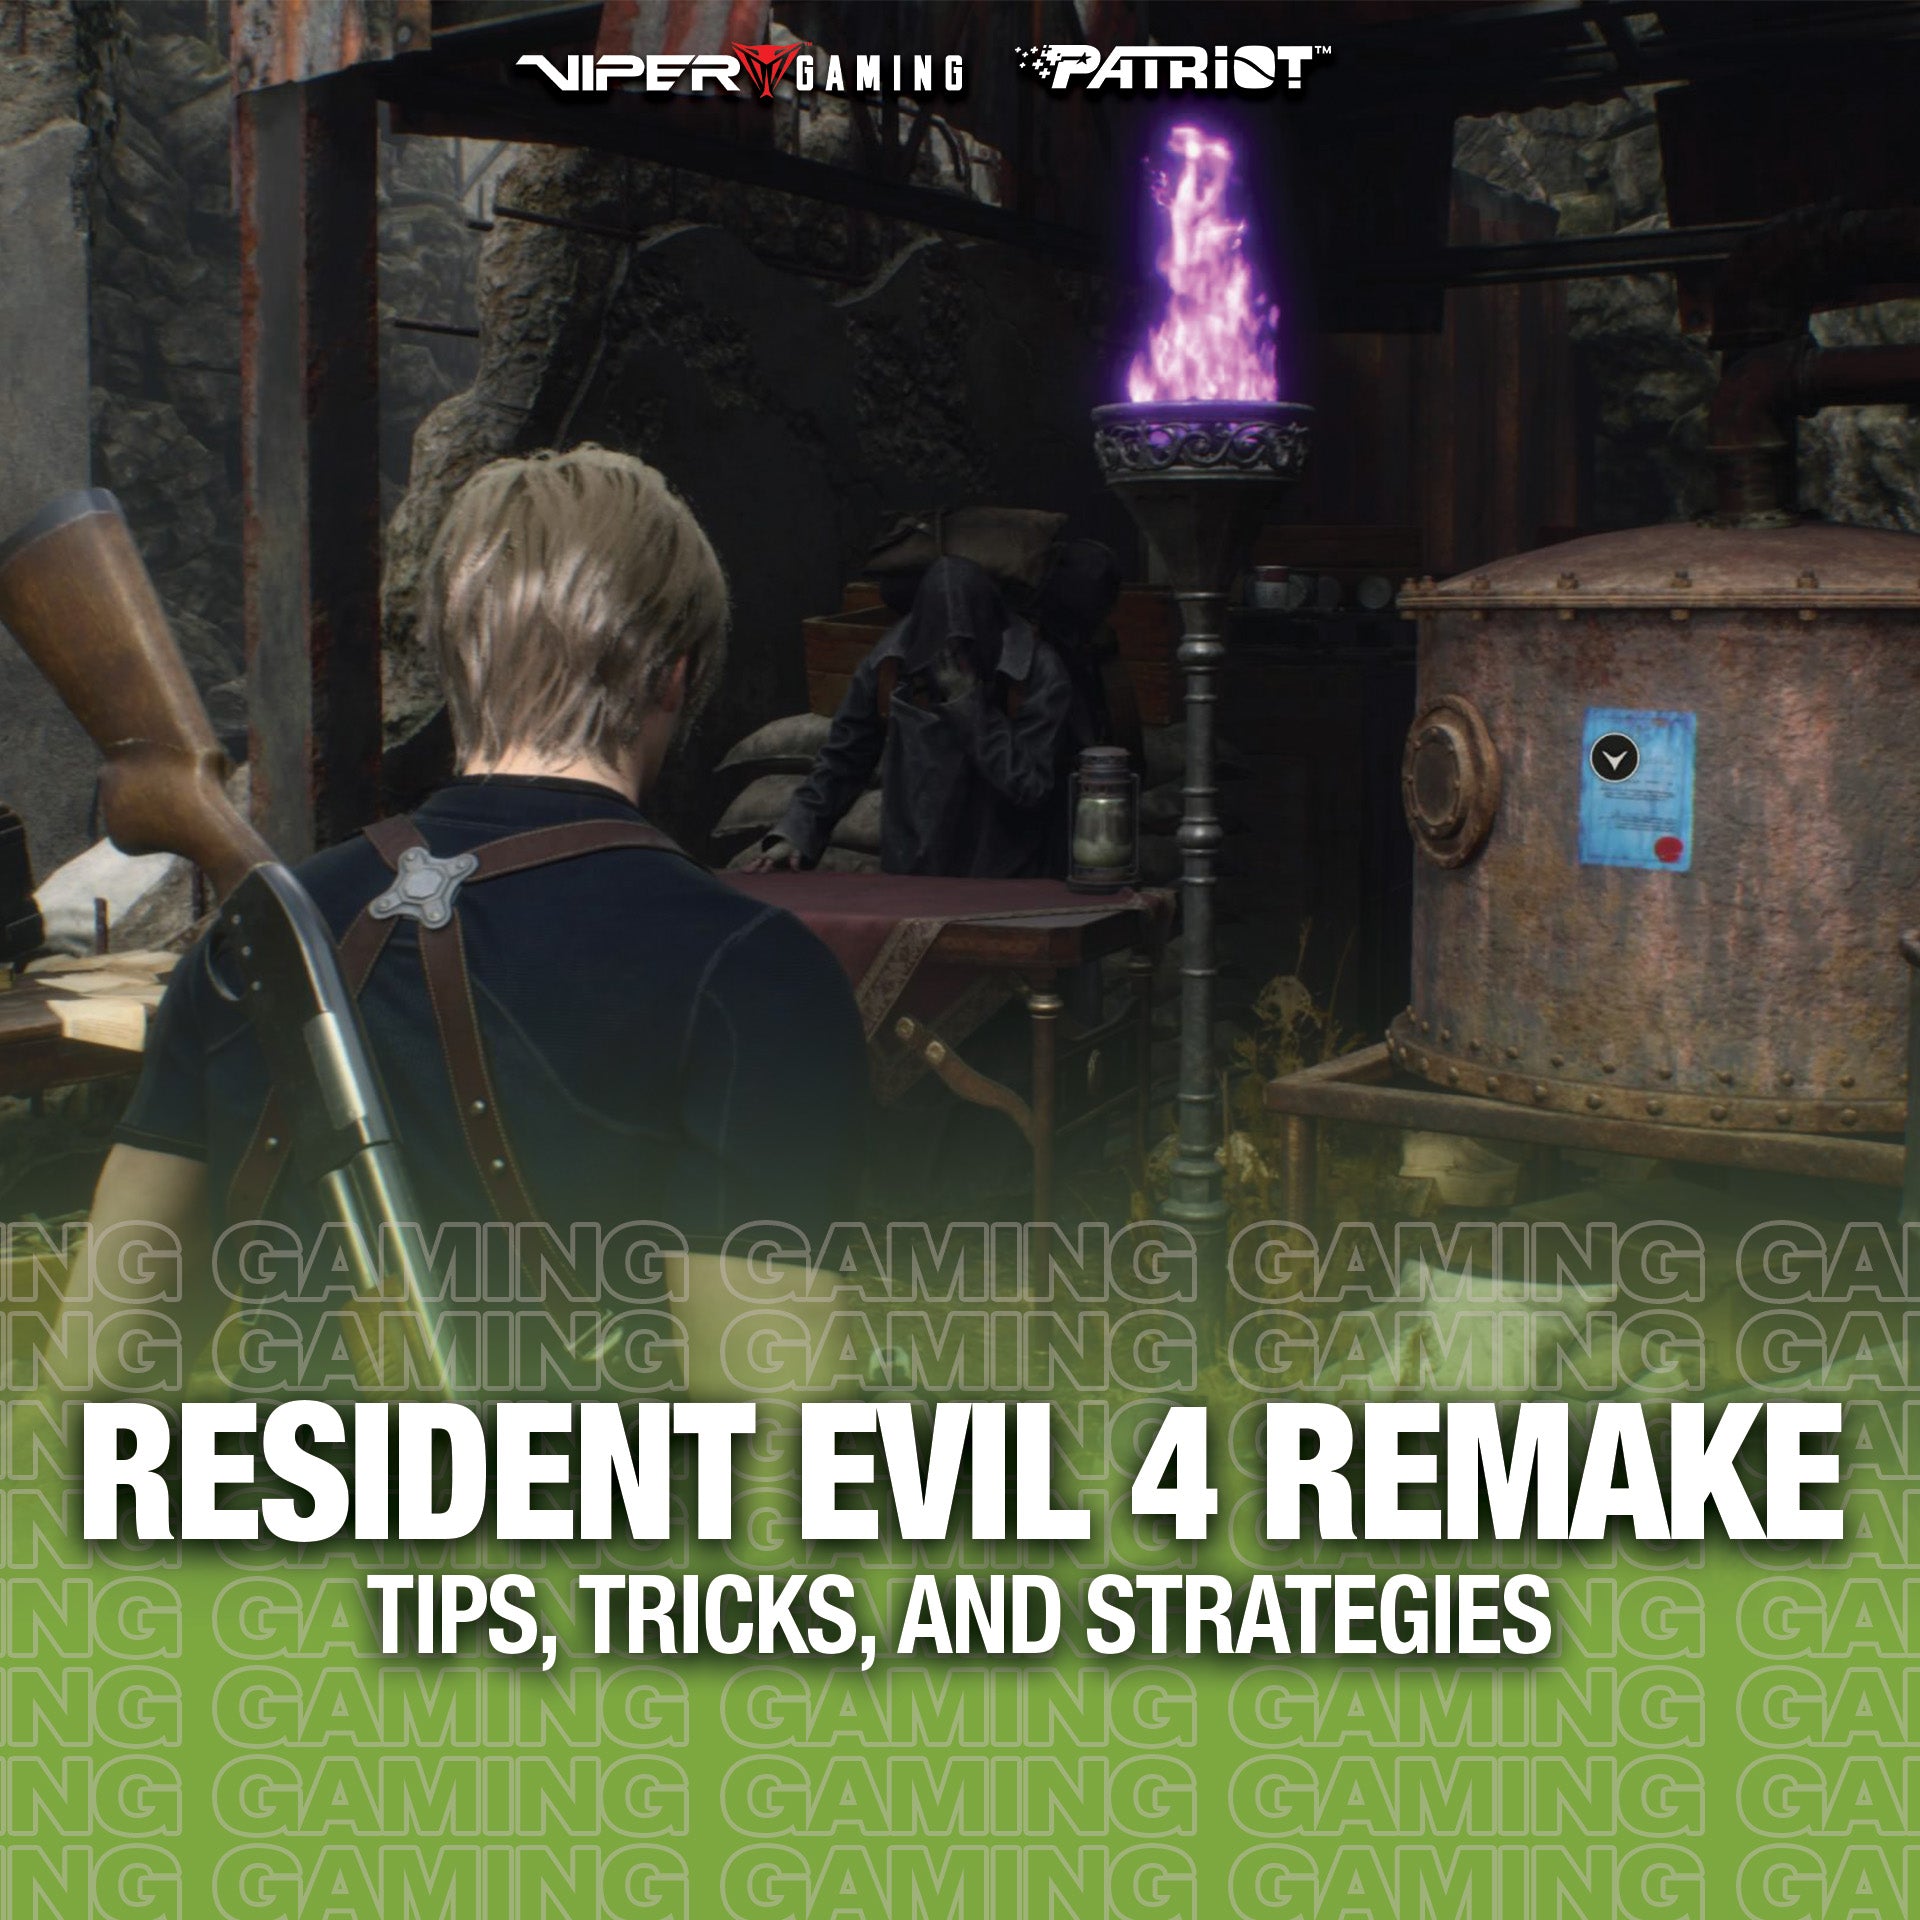 PC is the best way to play Resident Evil 4